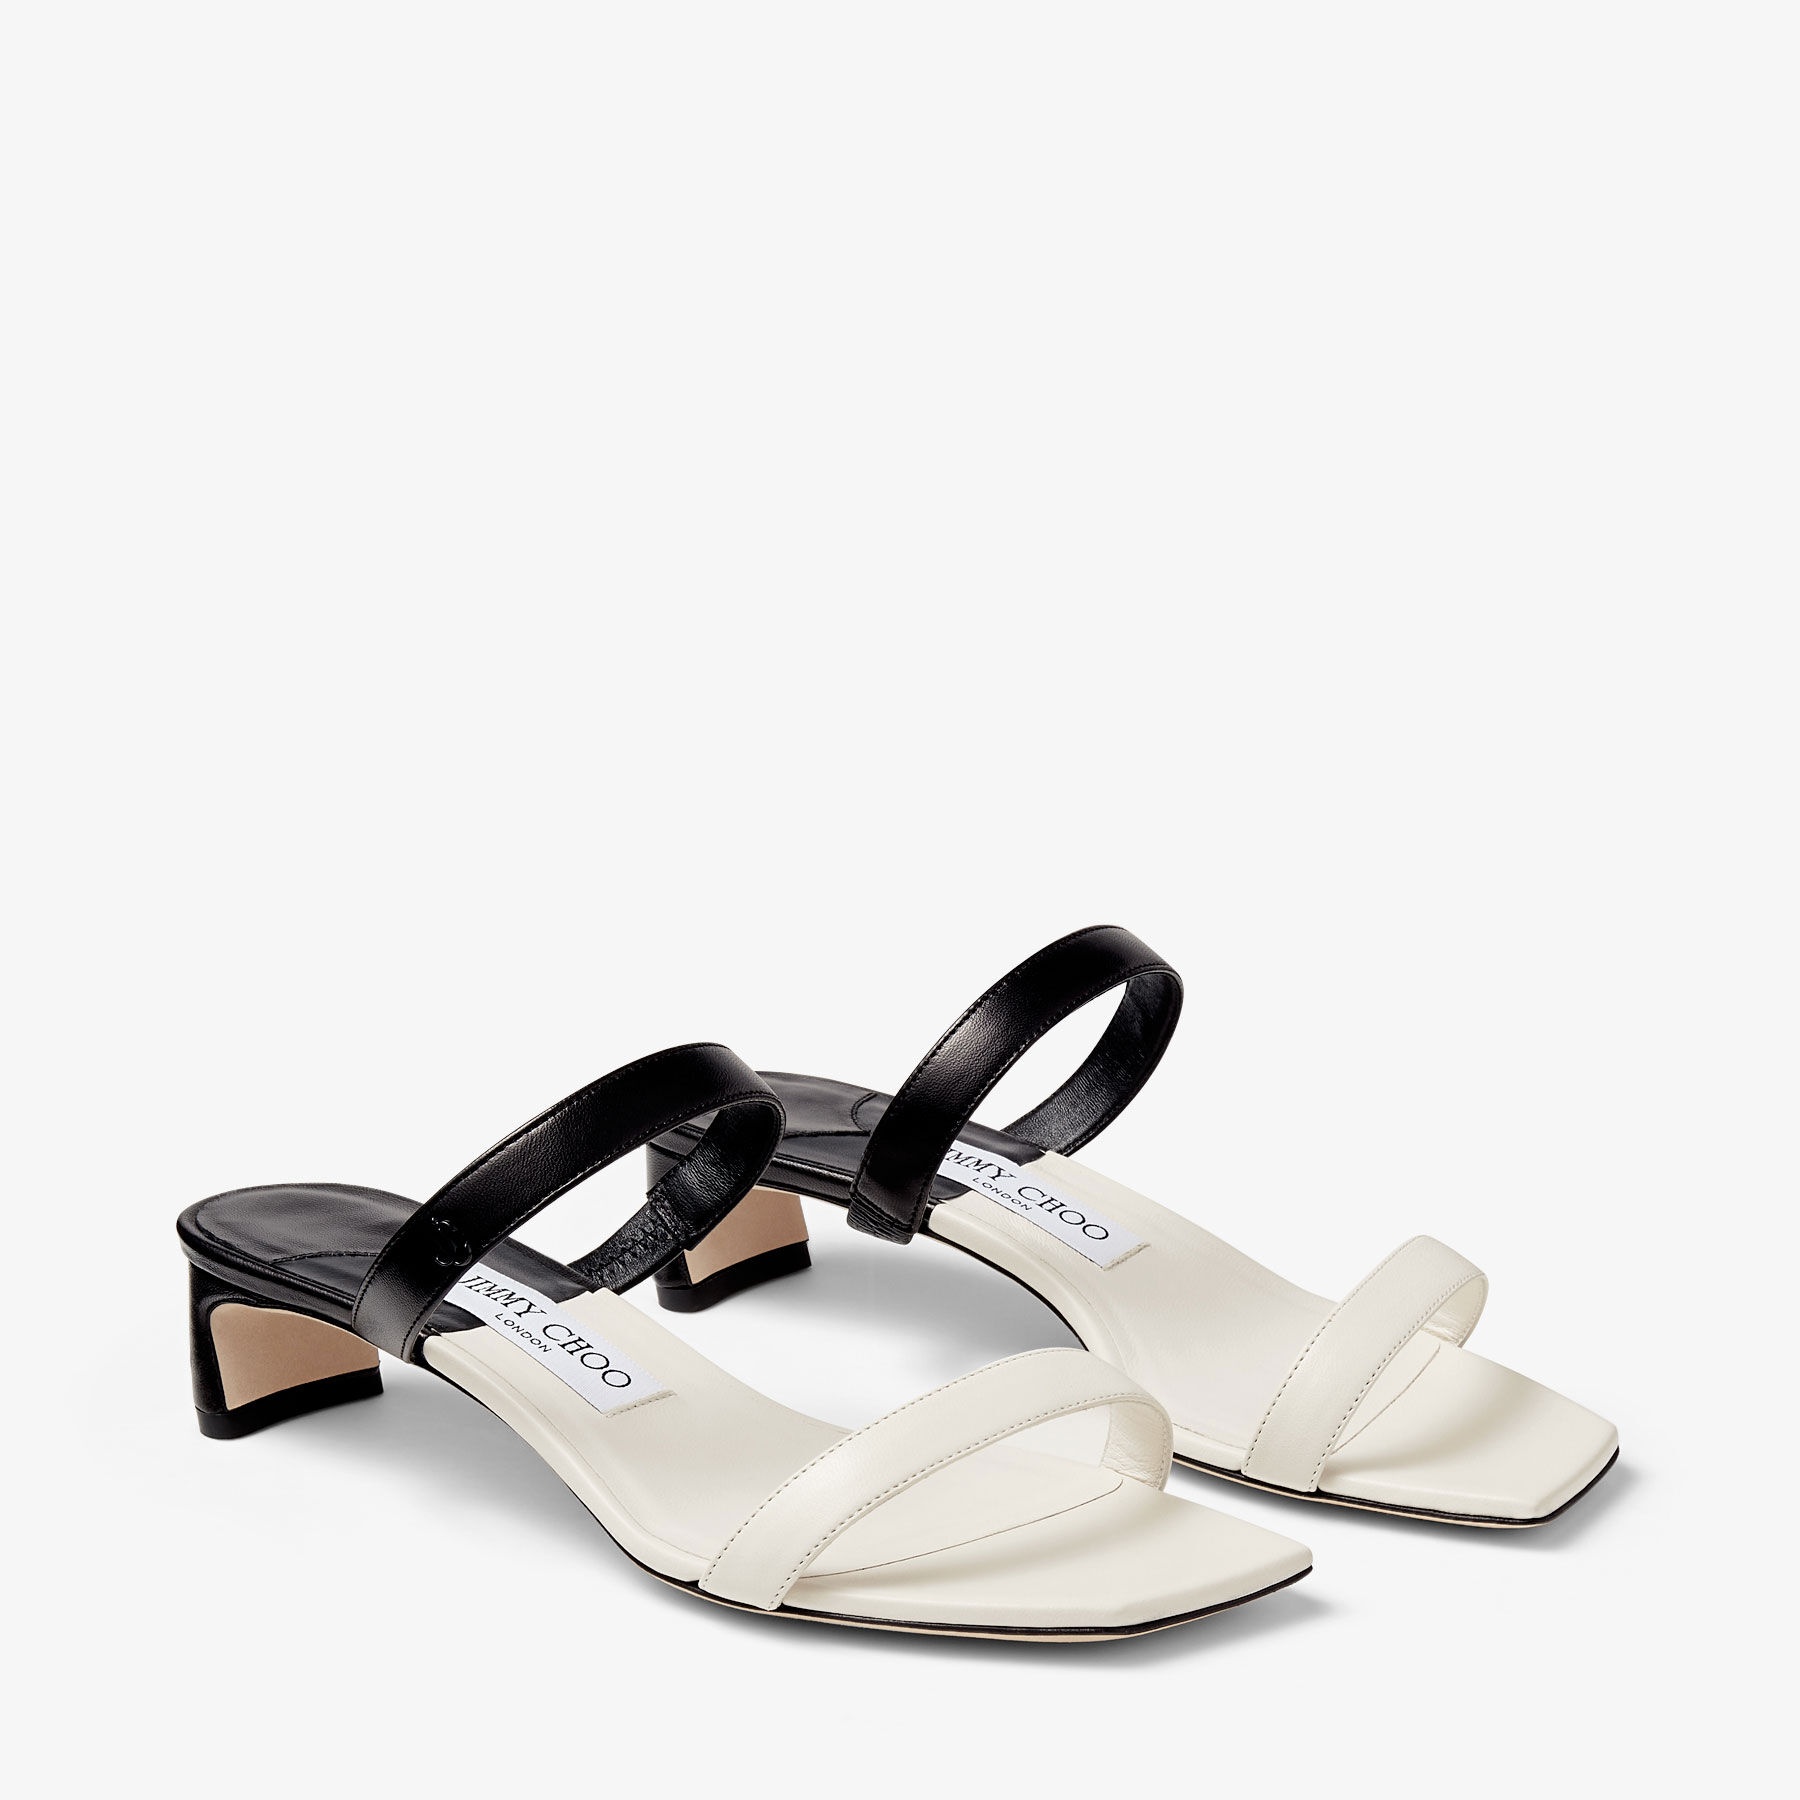 Kyda 35
Black and Latte Nappa Leather Sandals - 2